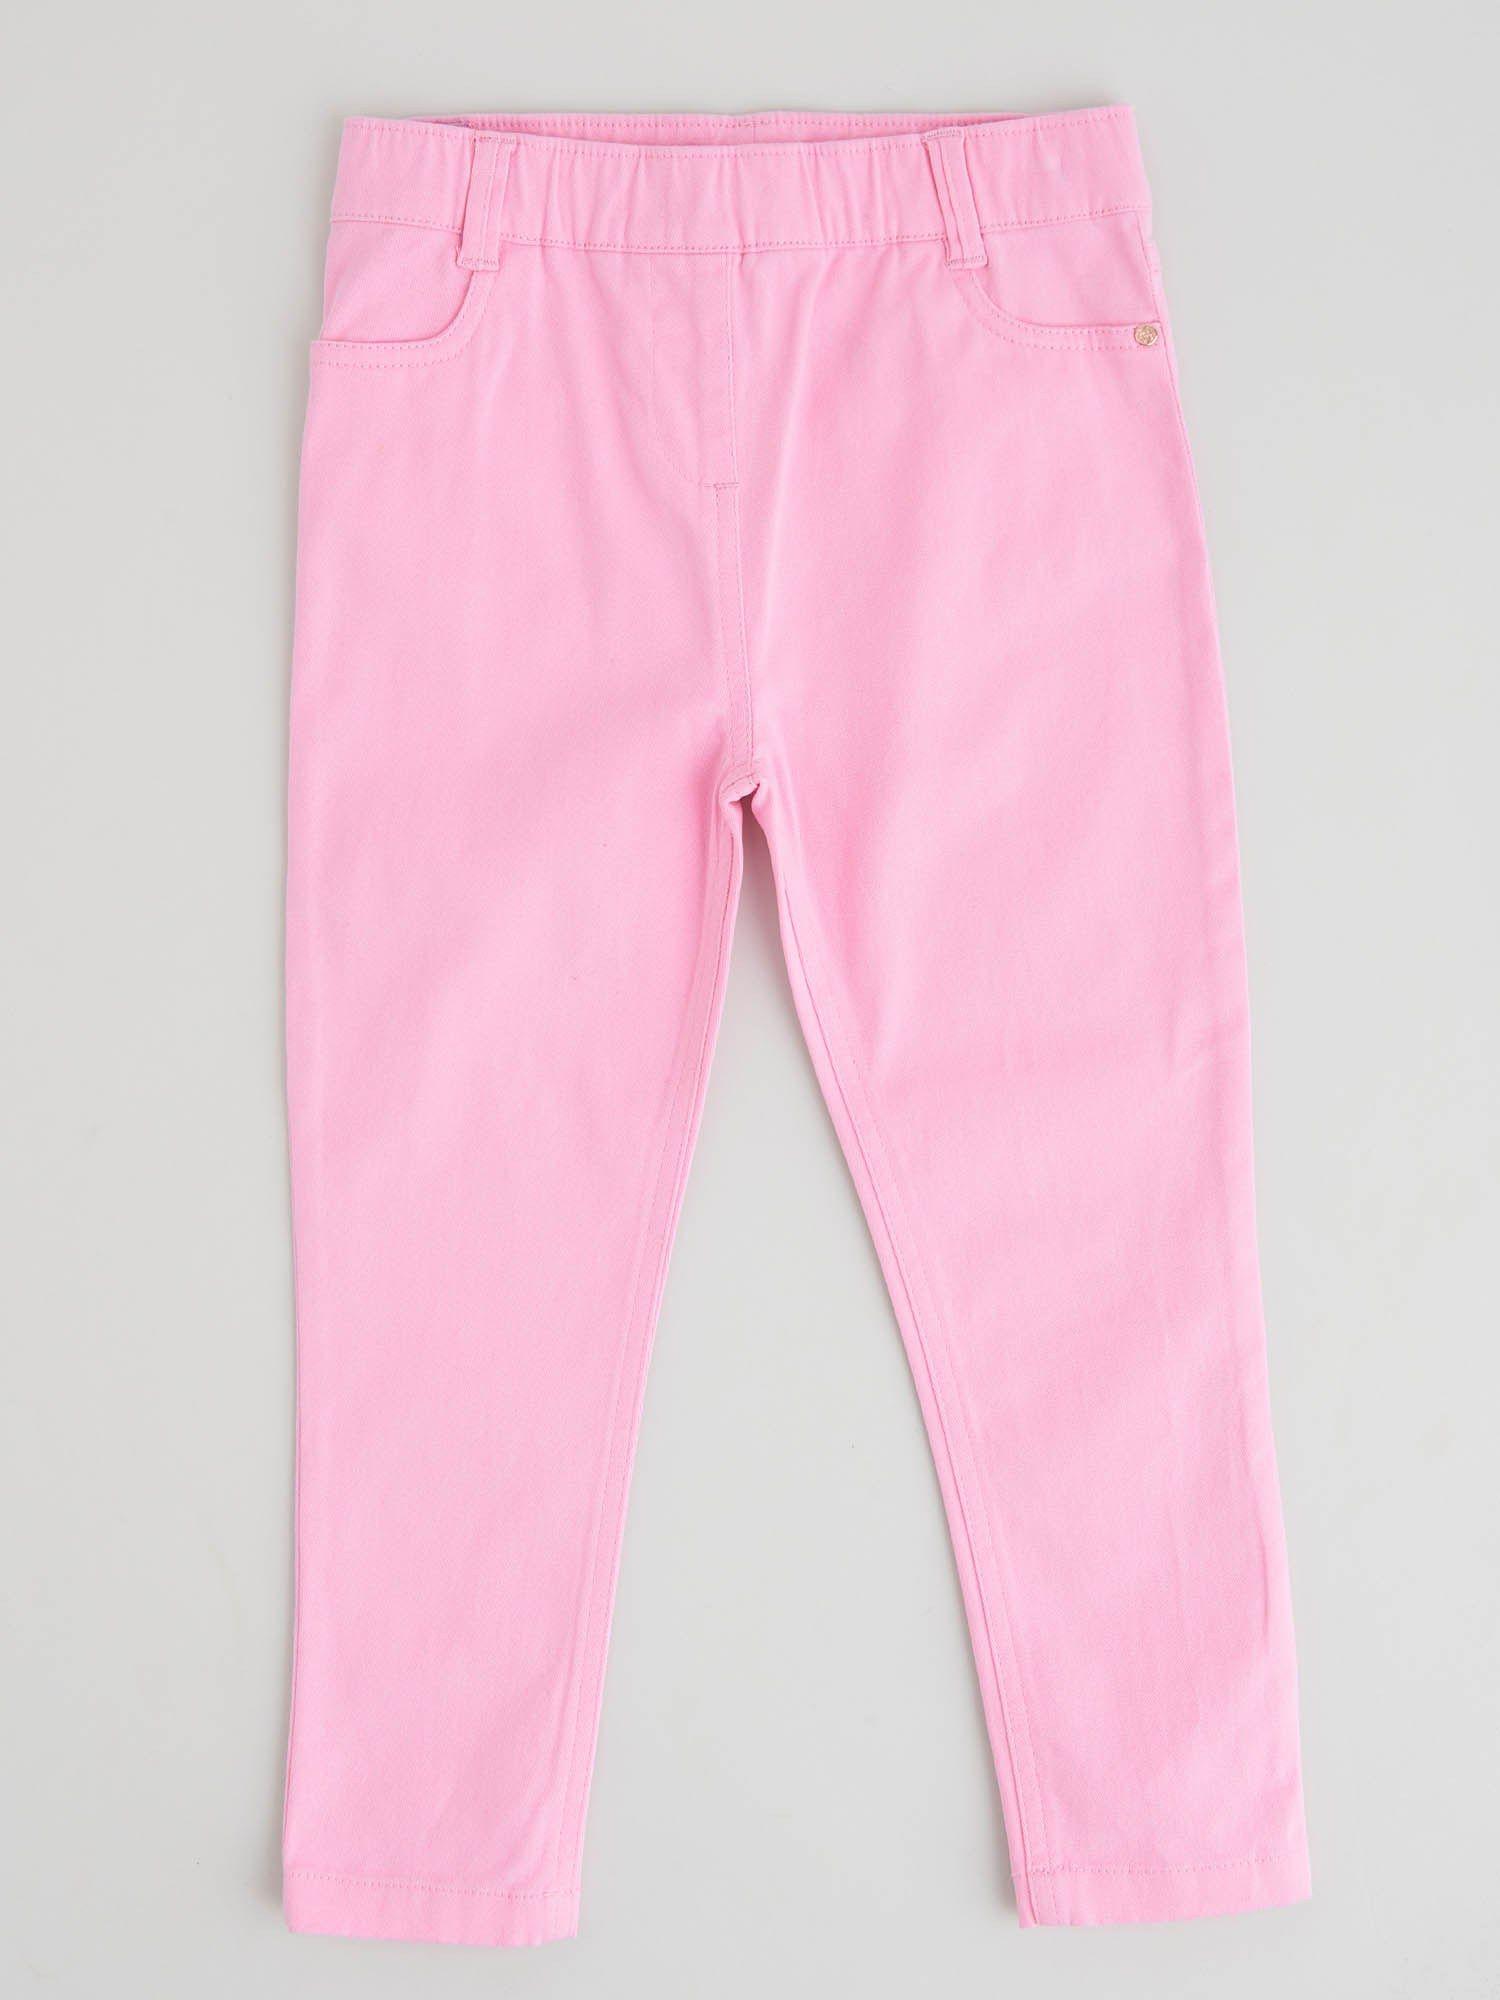 pink woven jeans